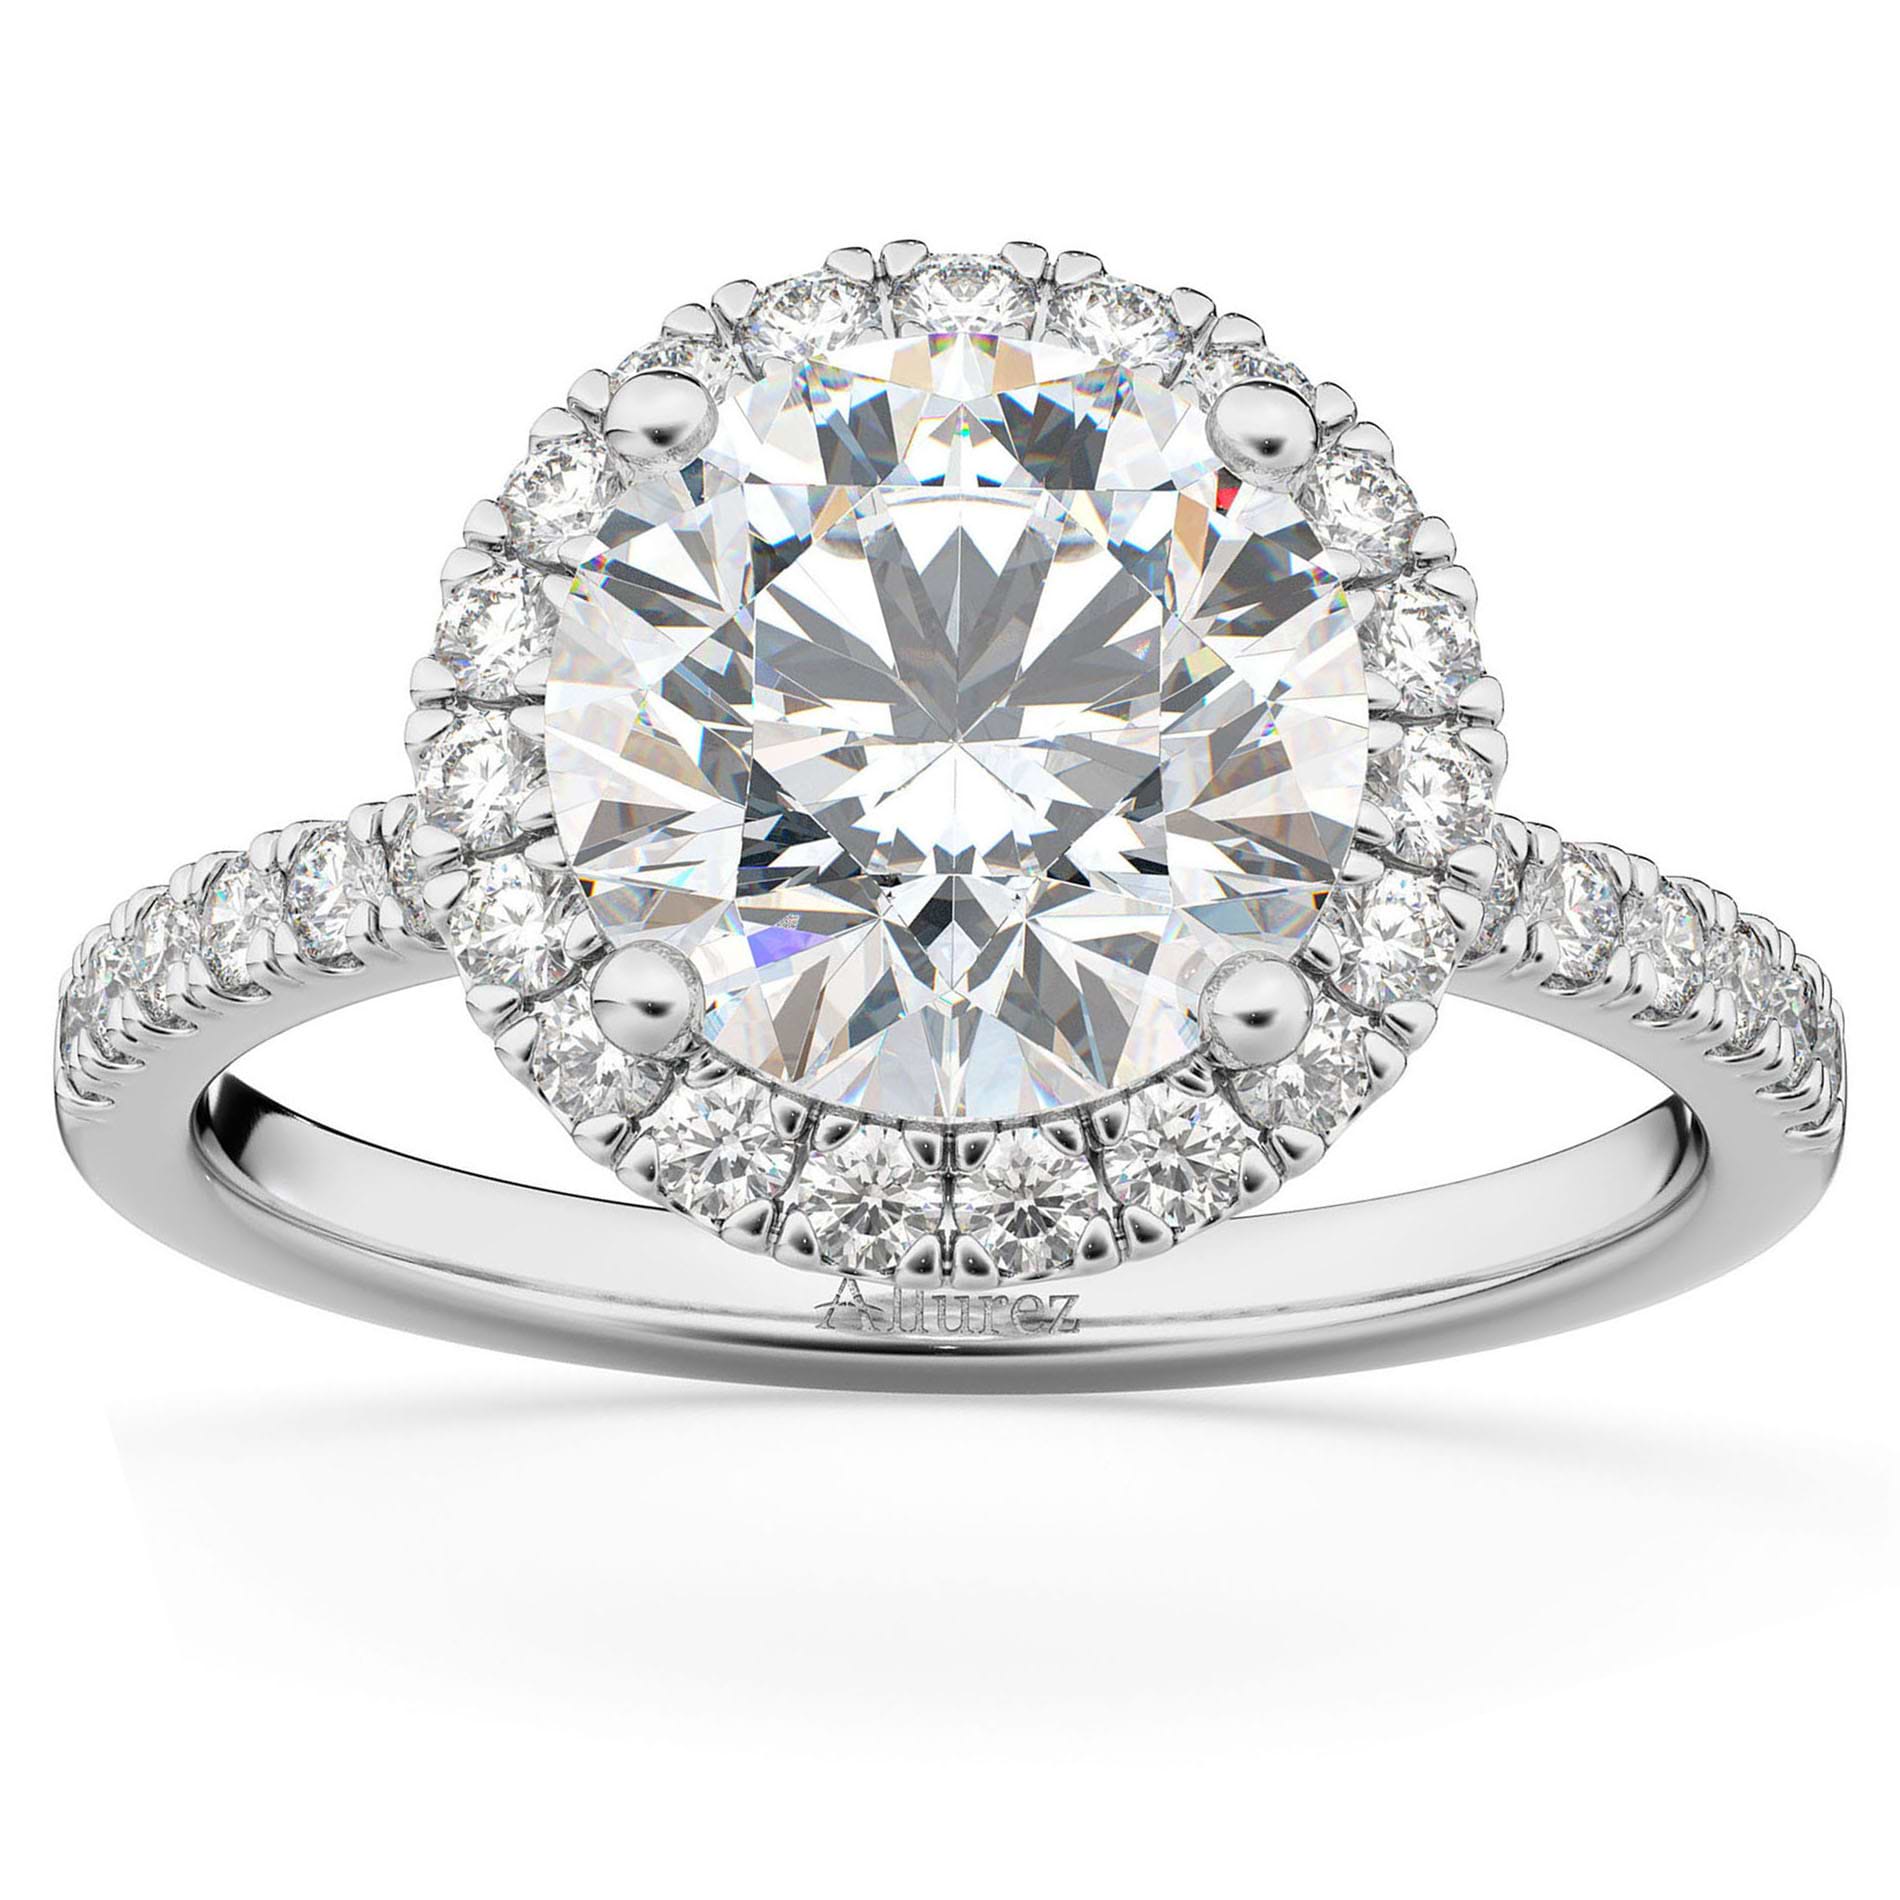 Diamond Accented Halo Engagement Ring Setting 18k White Gold (0.50ct)